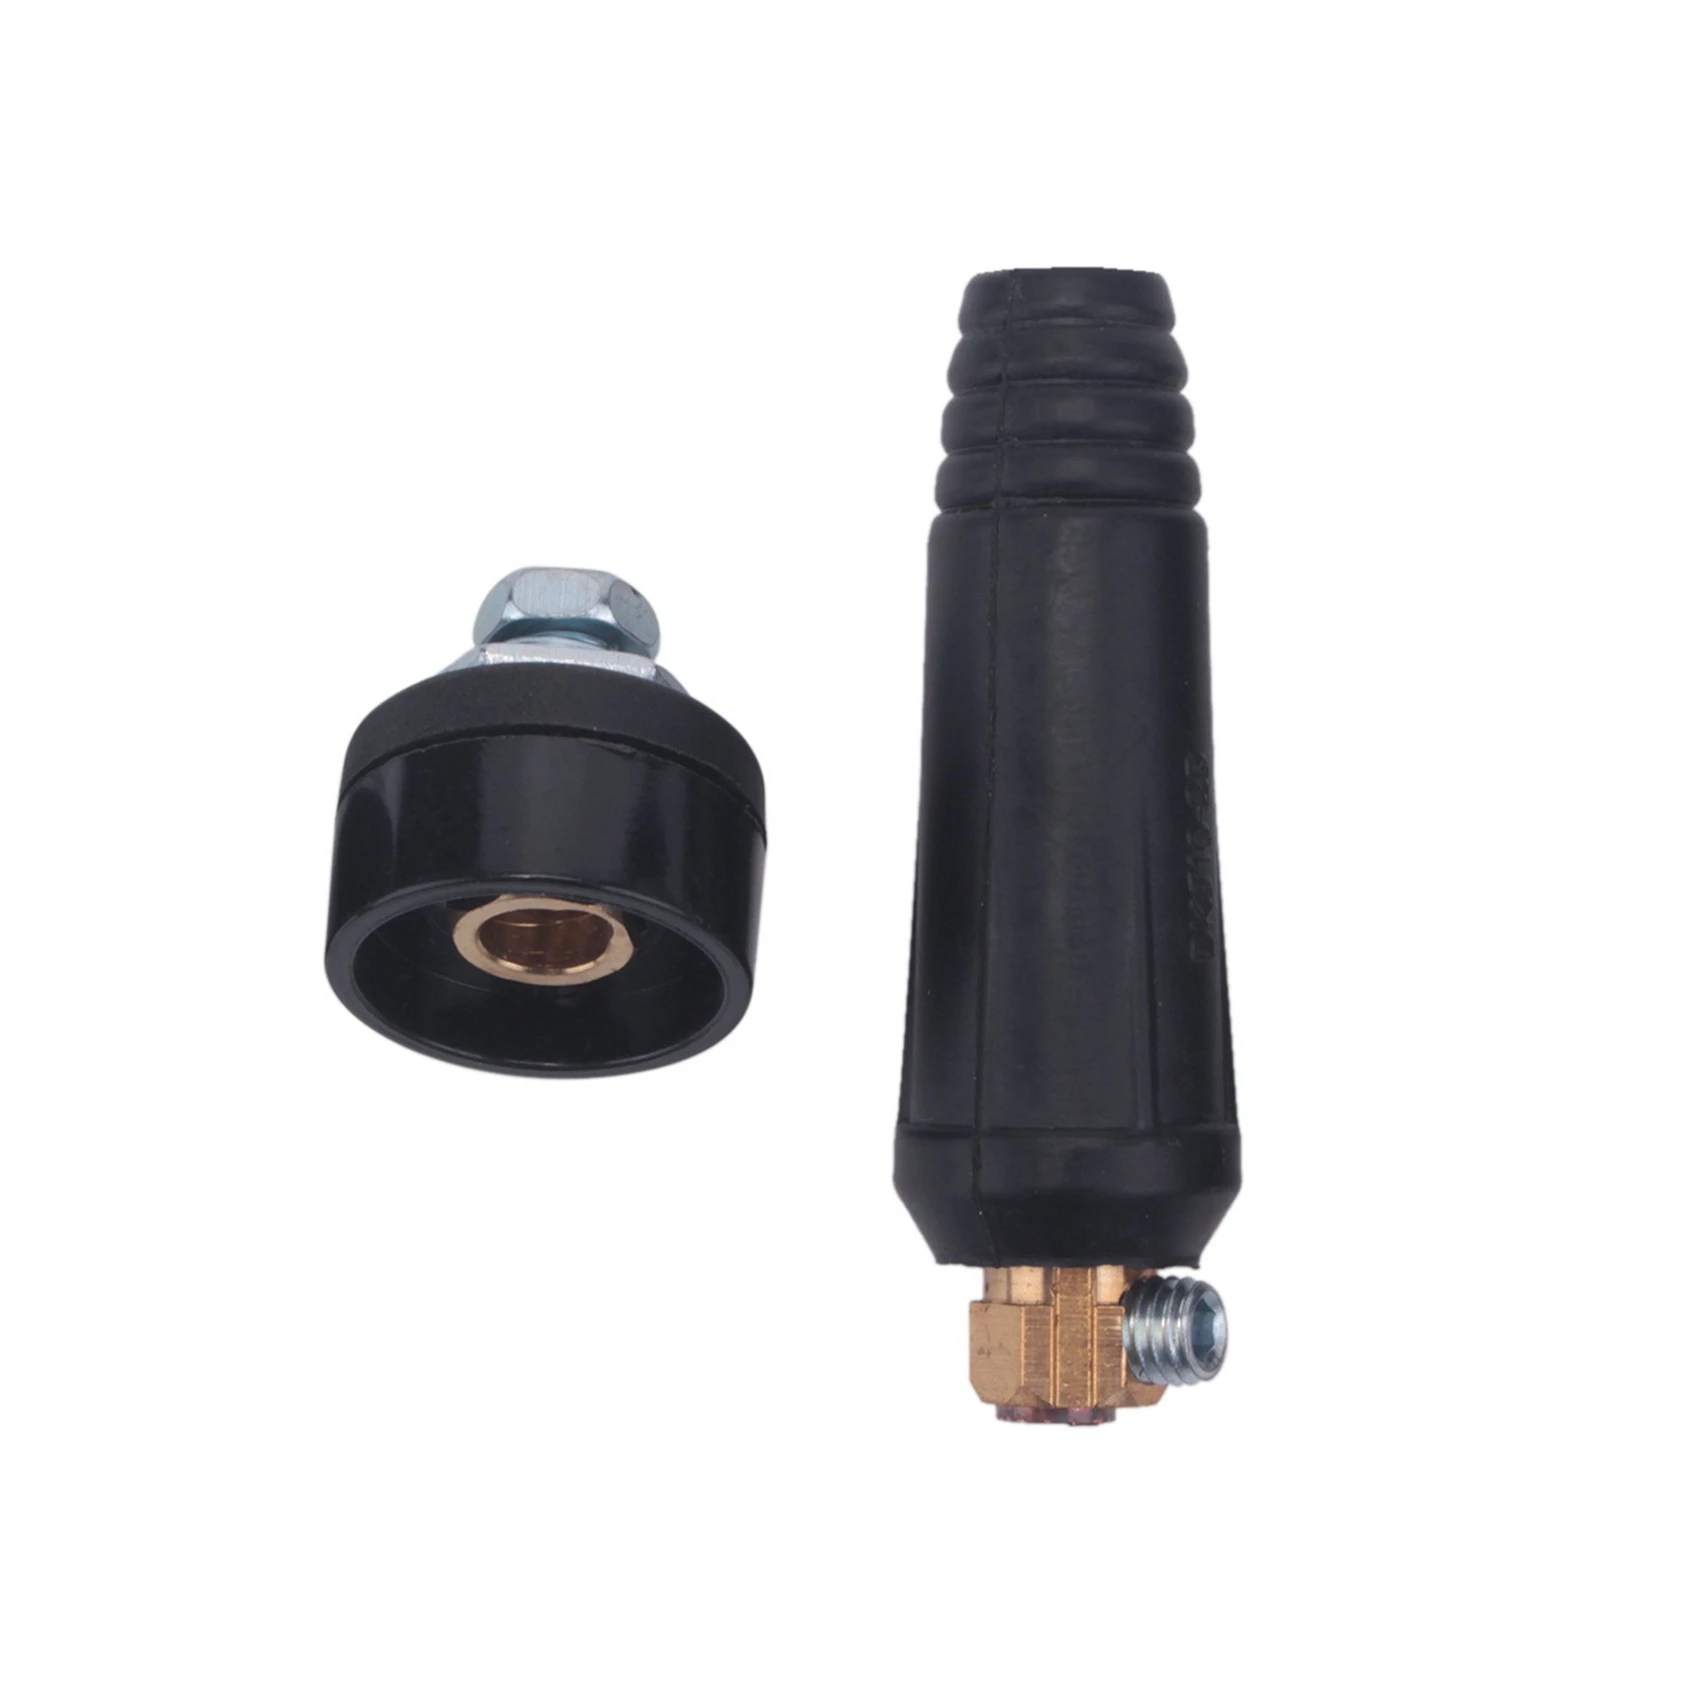 1 Set of Black European Style Electric Welding Machine Cable Connector DKJ 10-25 Quick Connector Plug Socket